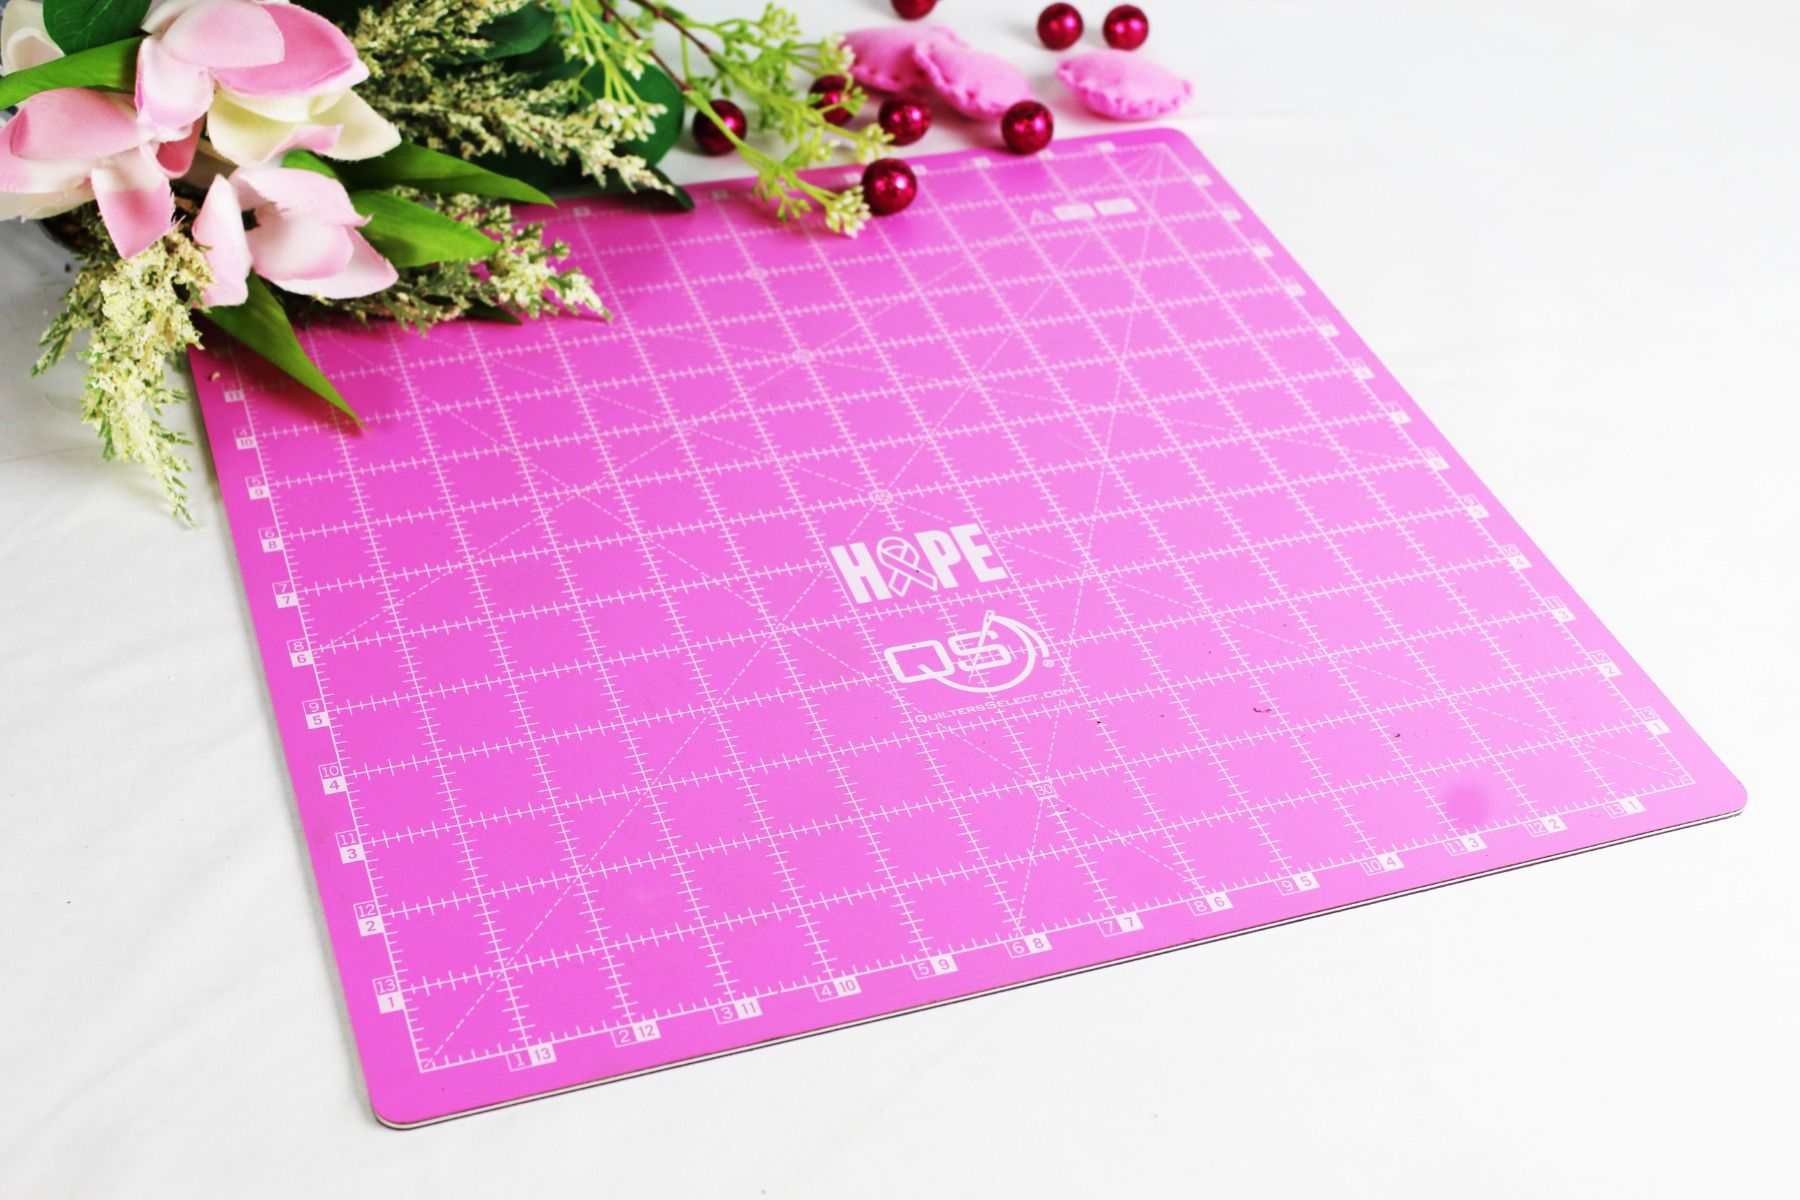 Quilters Select Hope Rotary Cutting Mat 14x14 in Pink